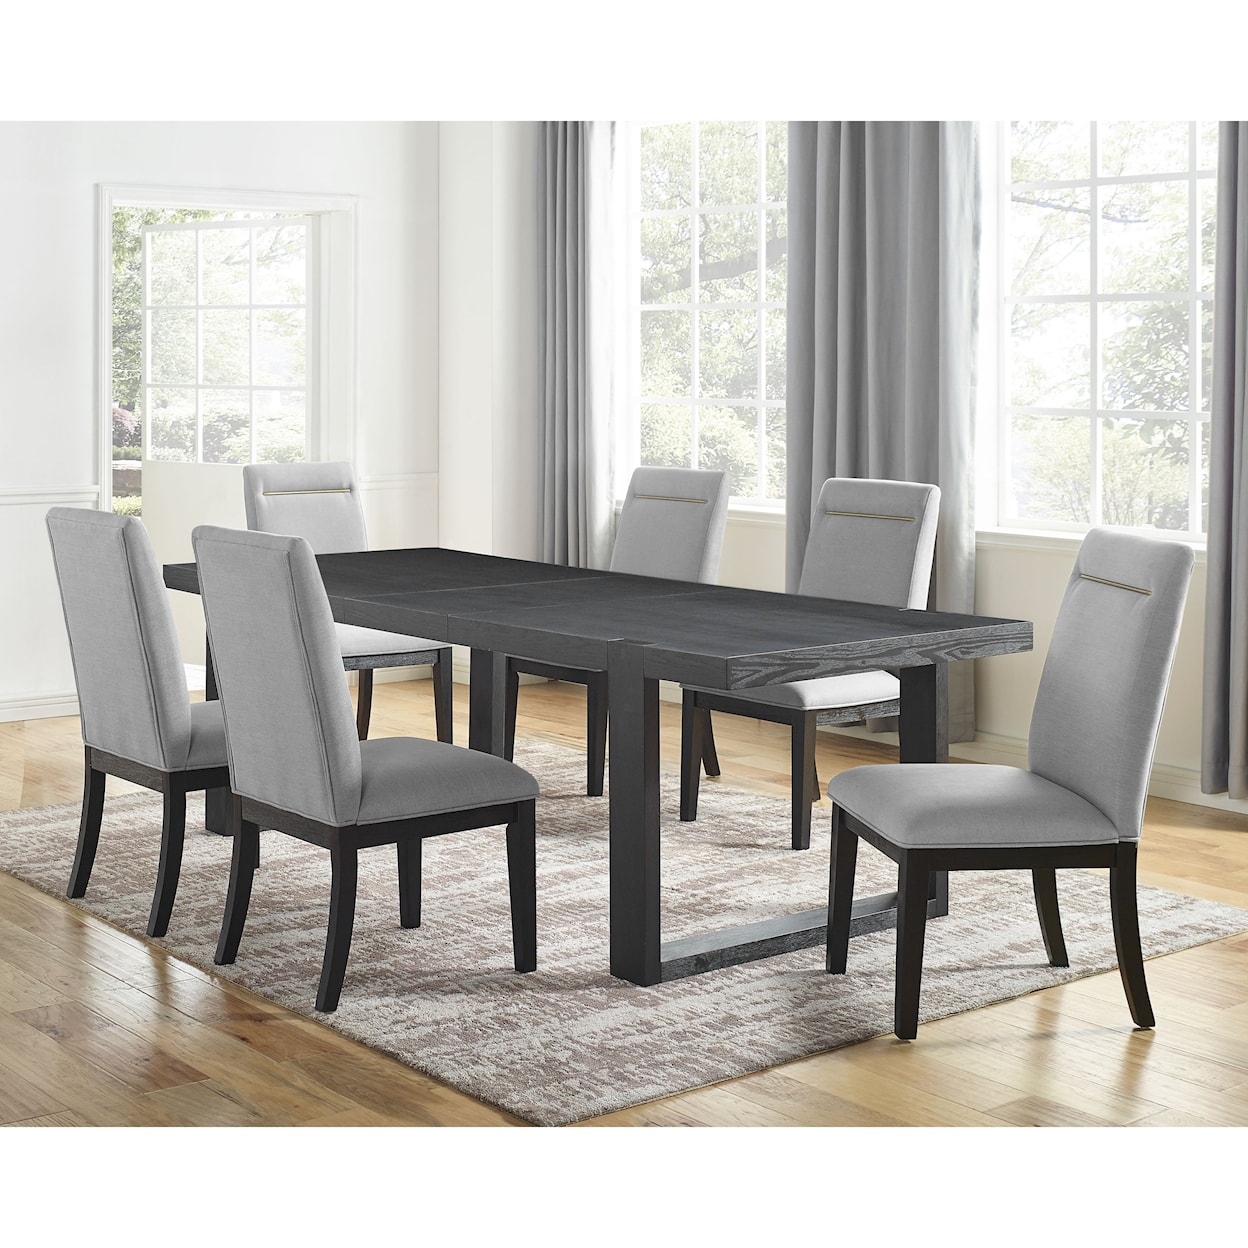 Steve Silver Yves 7-Piece Table and Chair Set